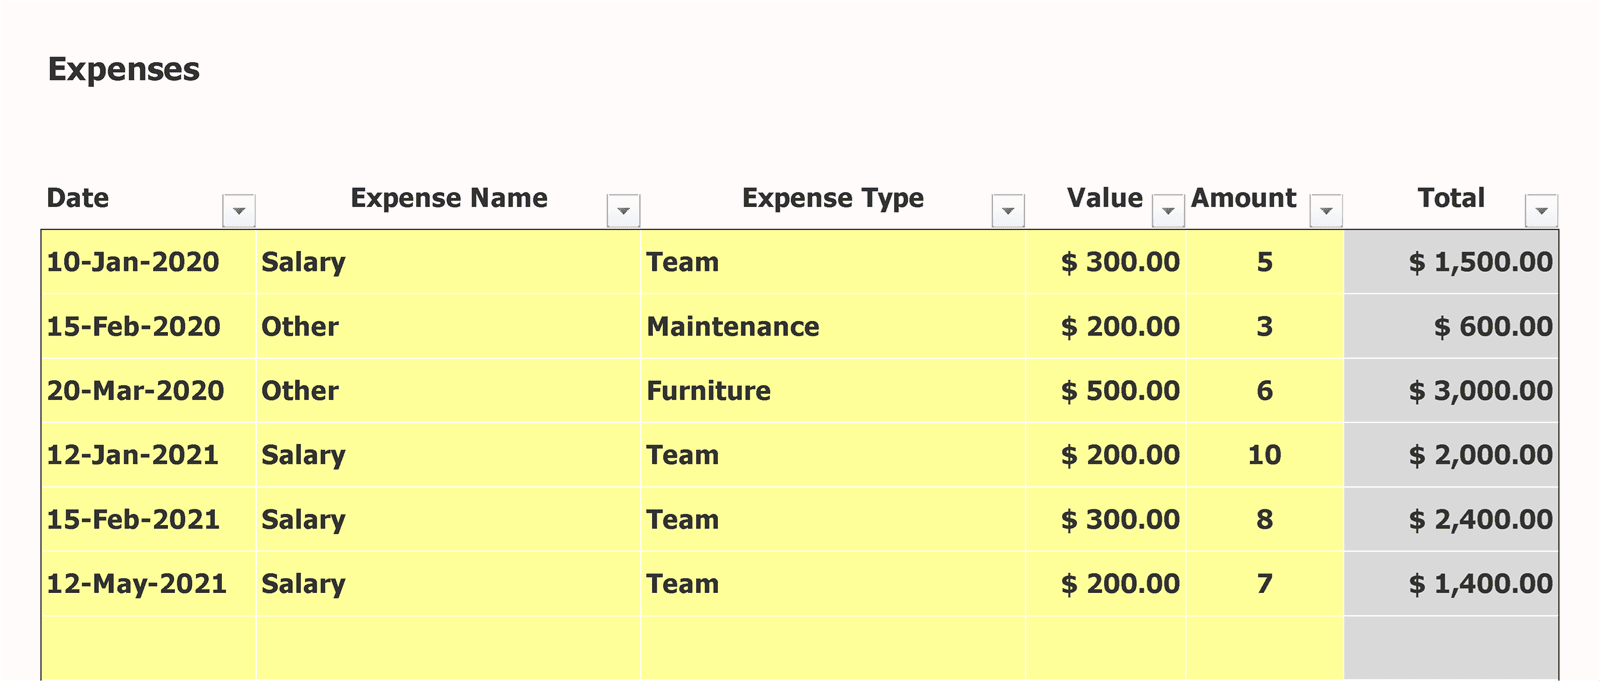 Hotel Booking Template Expenses